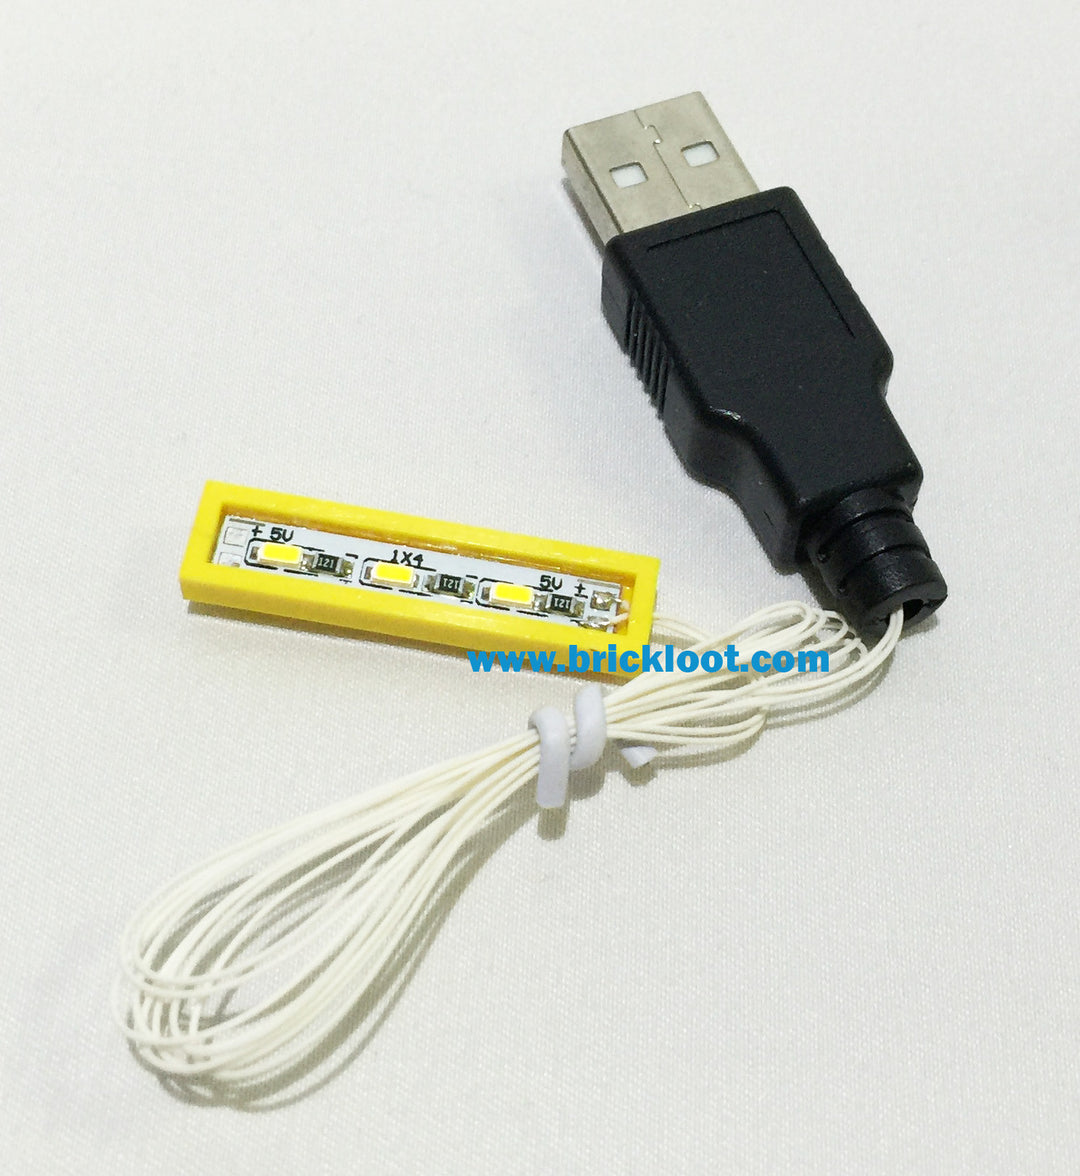 Brick Loot  Down Light for LEGO builds - Yellow 1x4/soft-white, yellowish- tint LED, powered through USB